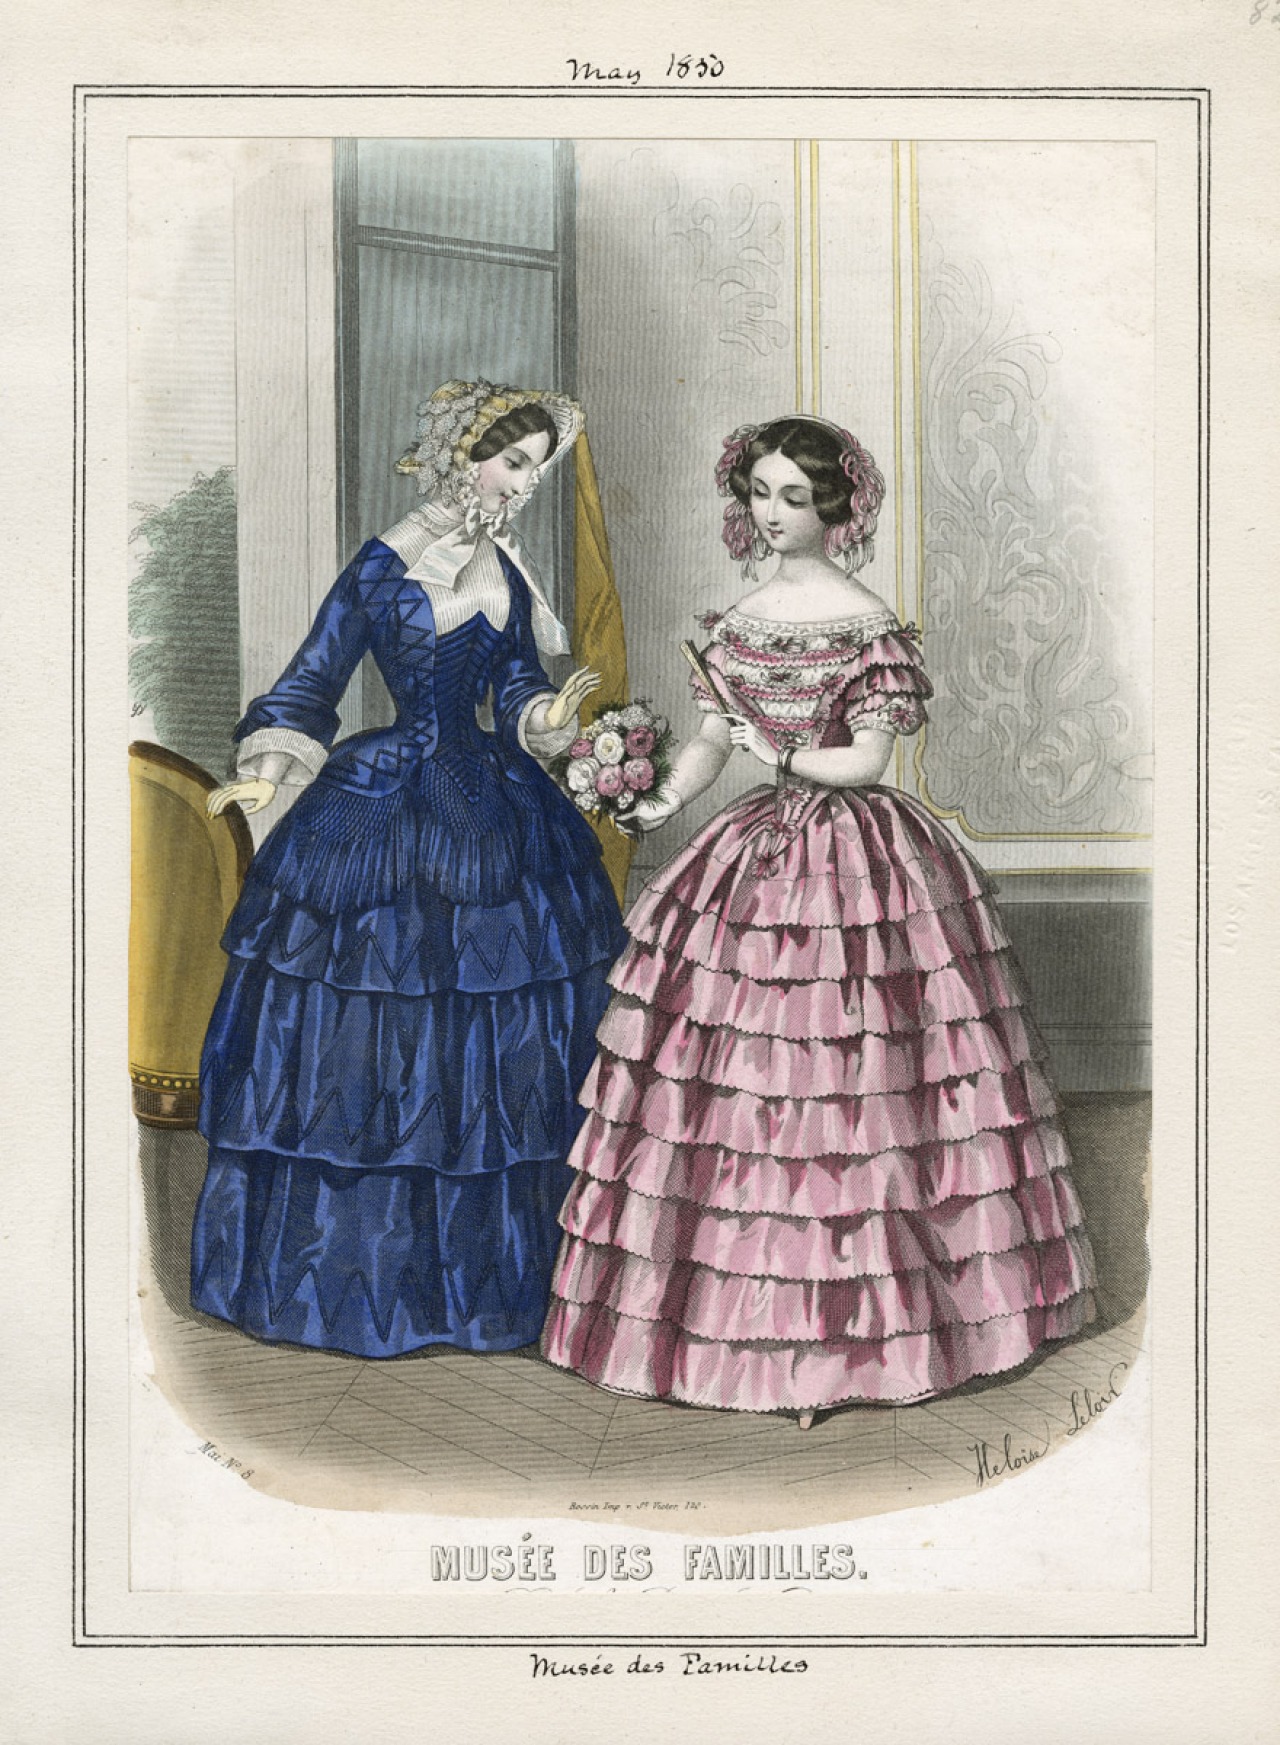 1850s and 1860s Evening dresses